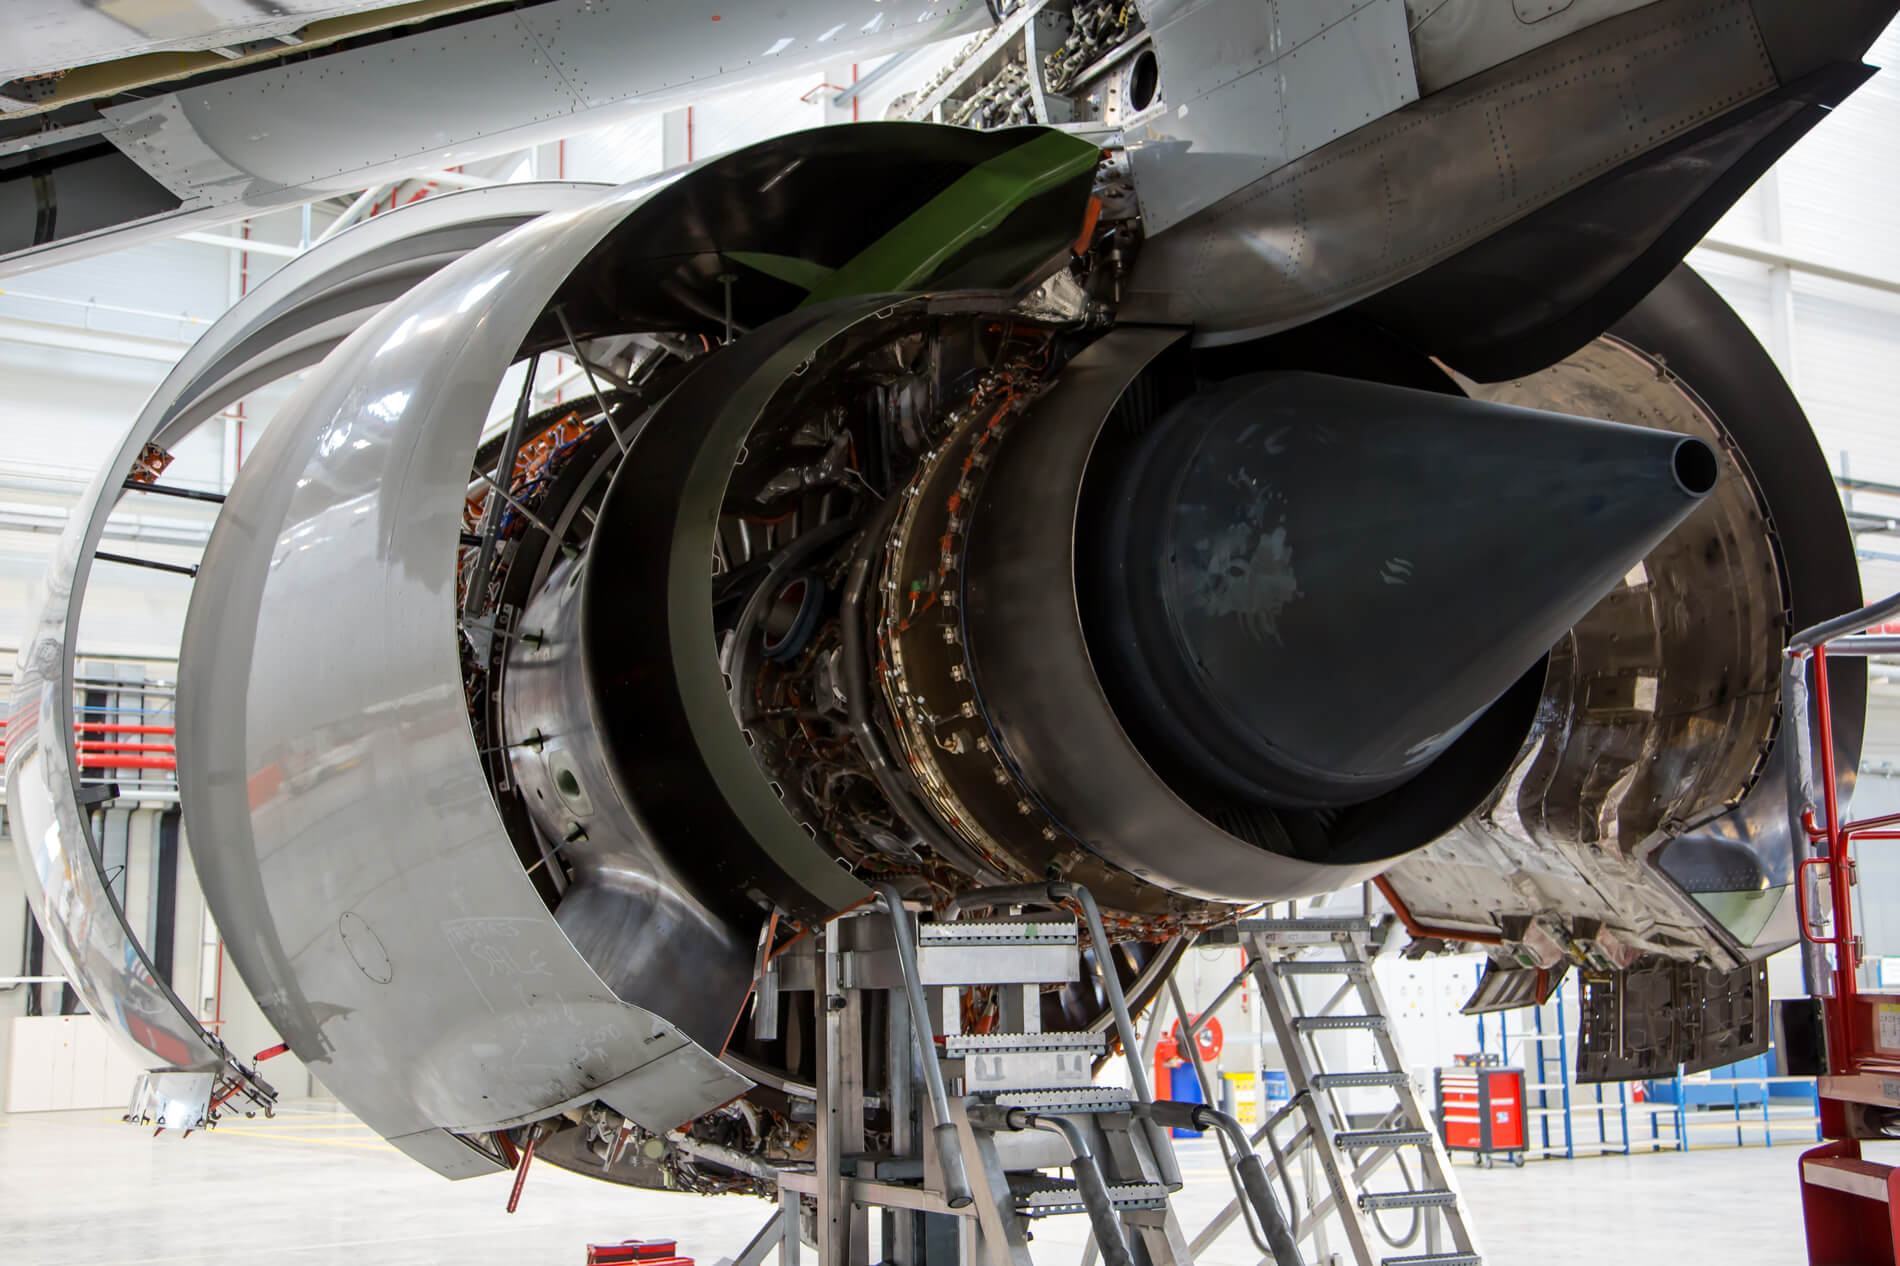 6 Questions To See How Much You Know About Jet Engines